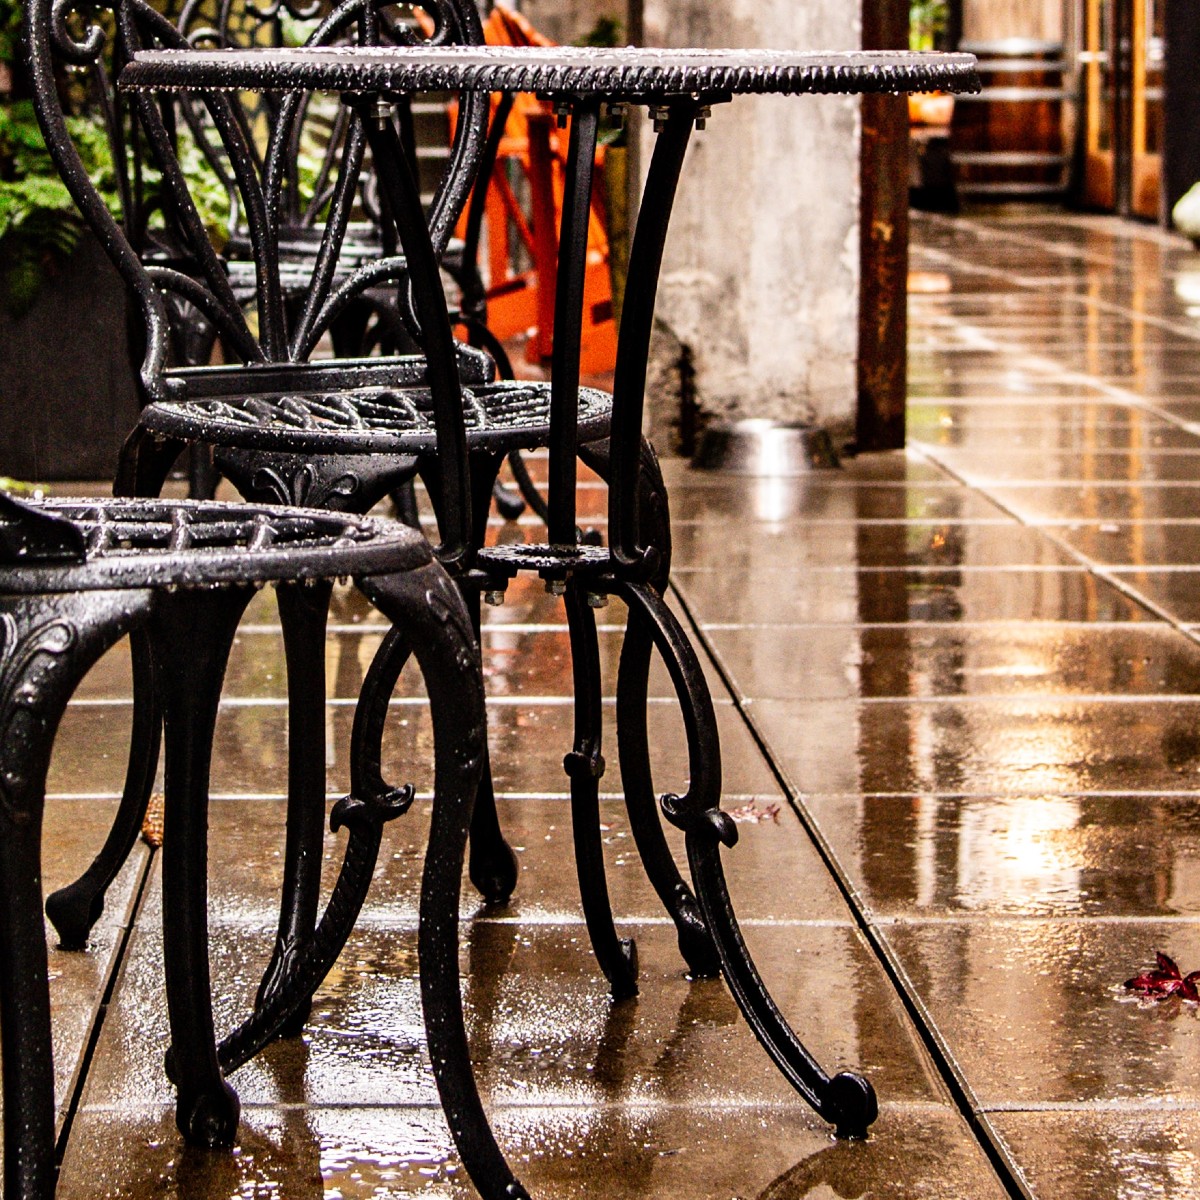 chairs-wet-paving